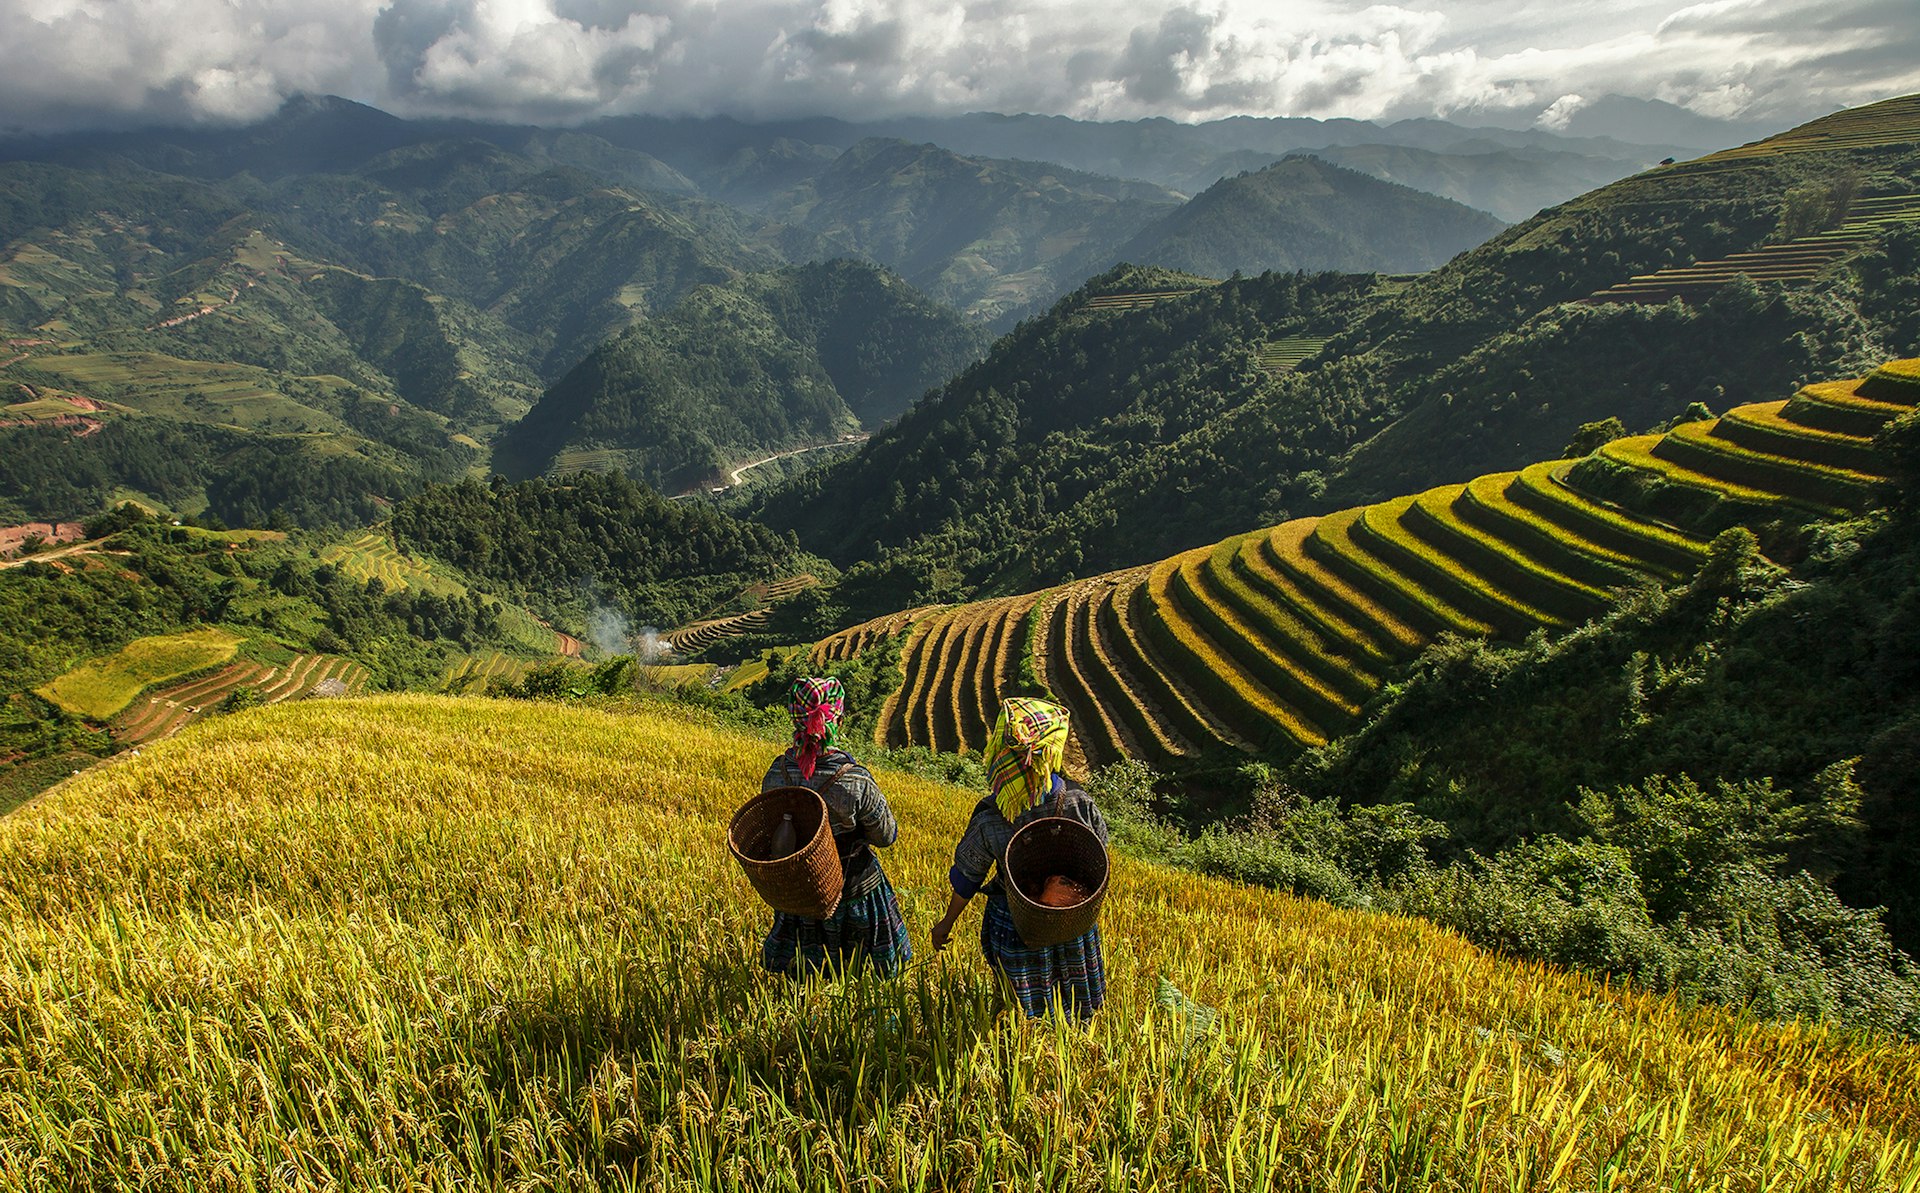 Two farmers wearing tribal dress and carrying baskets on their backs look out over the green rice fields in a mountainous area